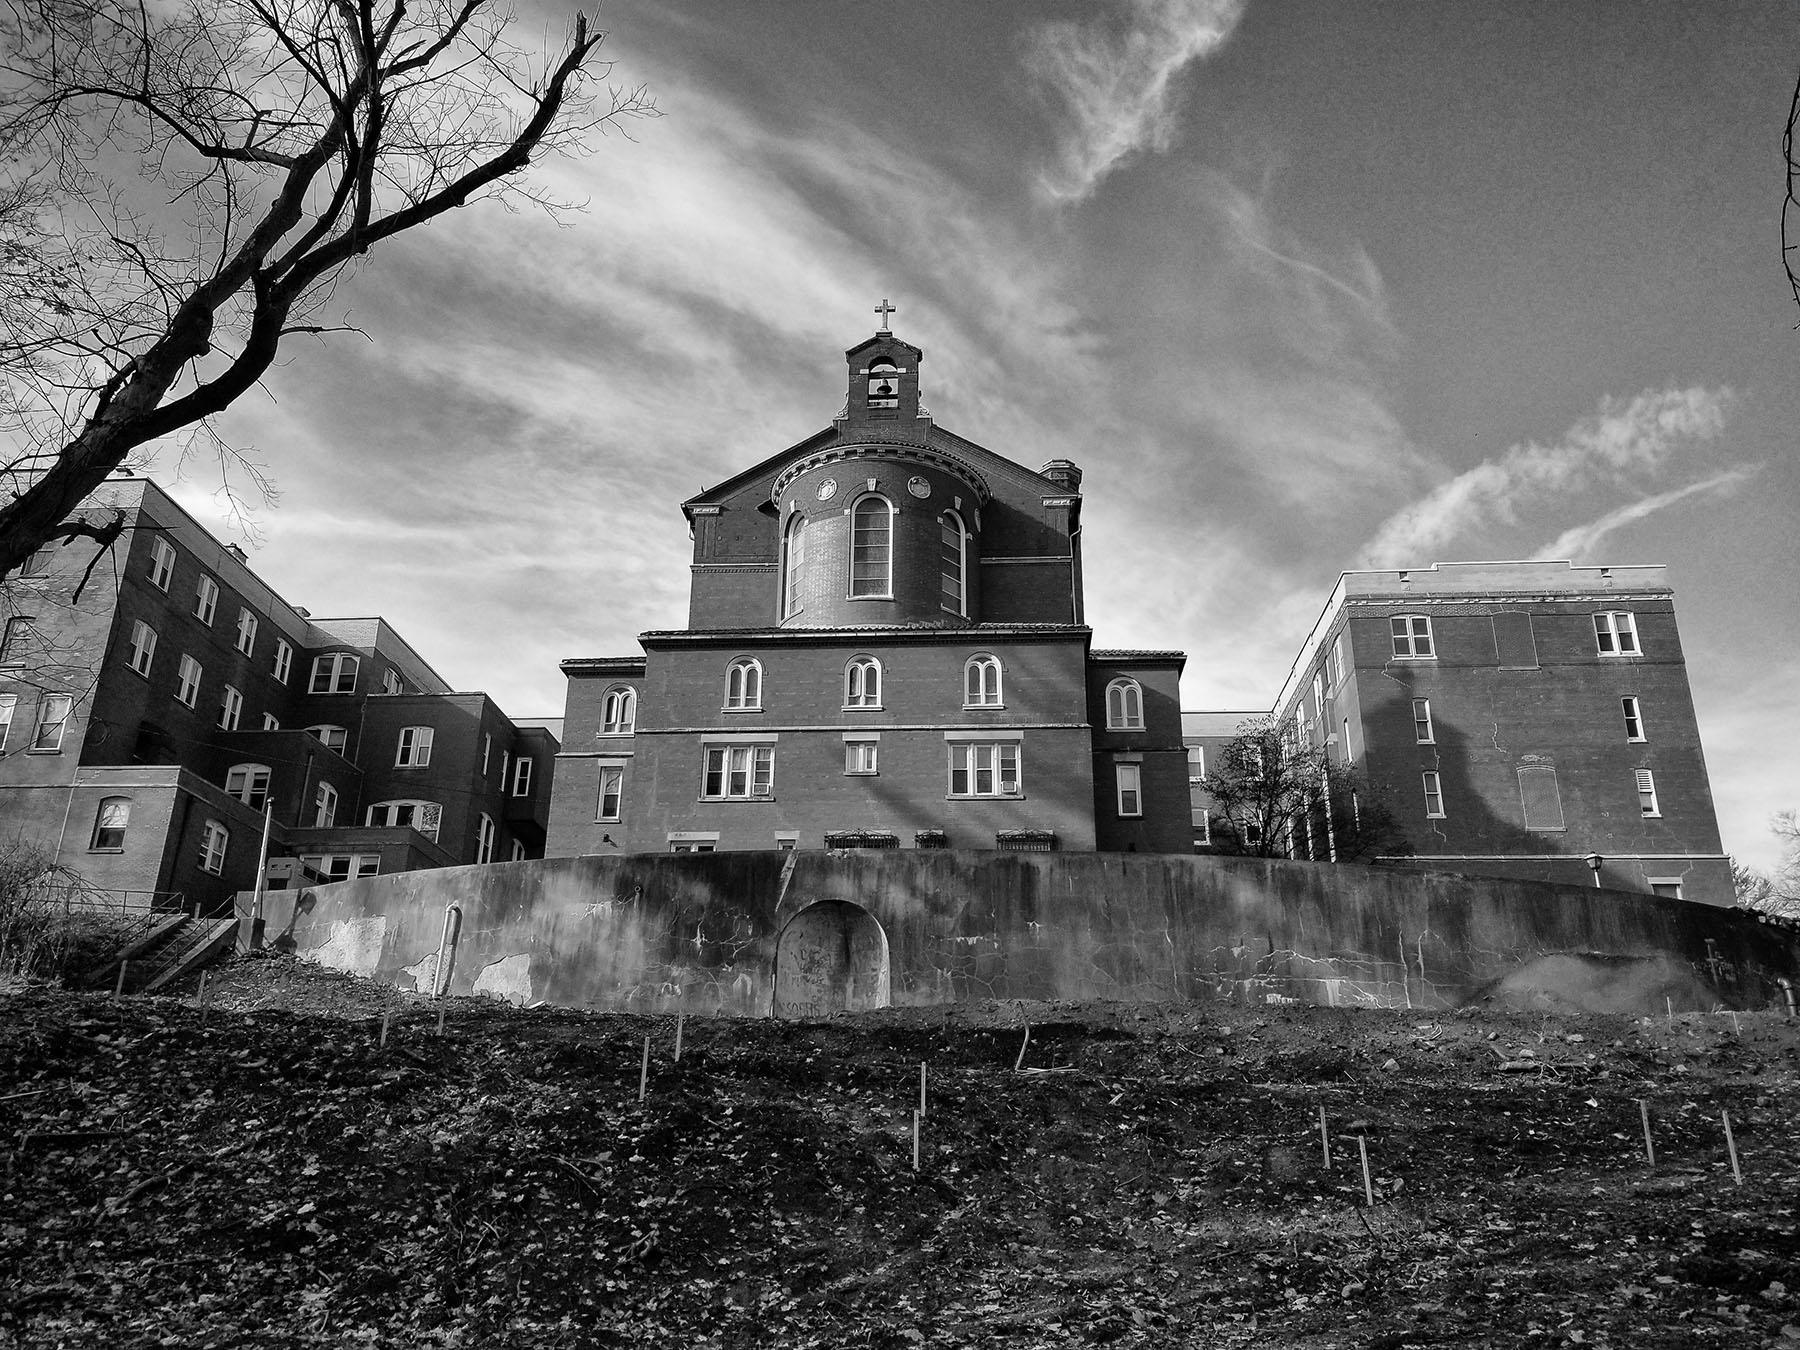 Convent ©2020 by bret wills